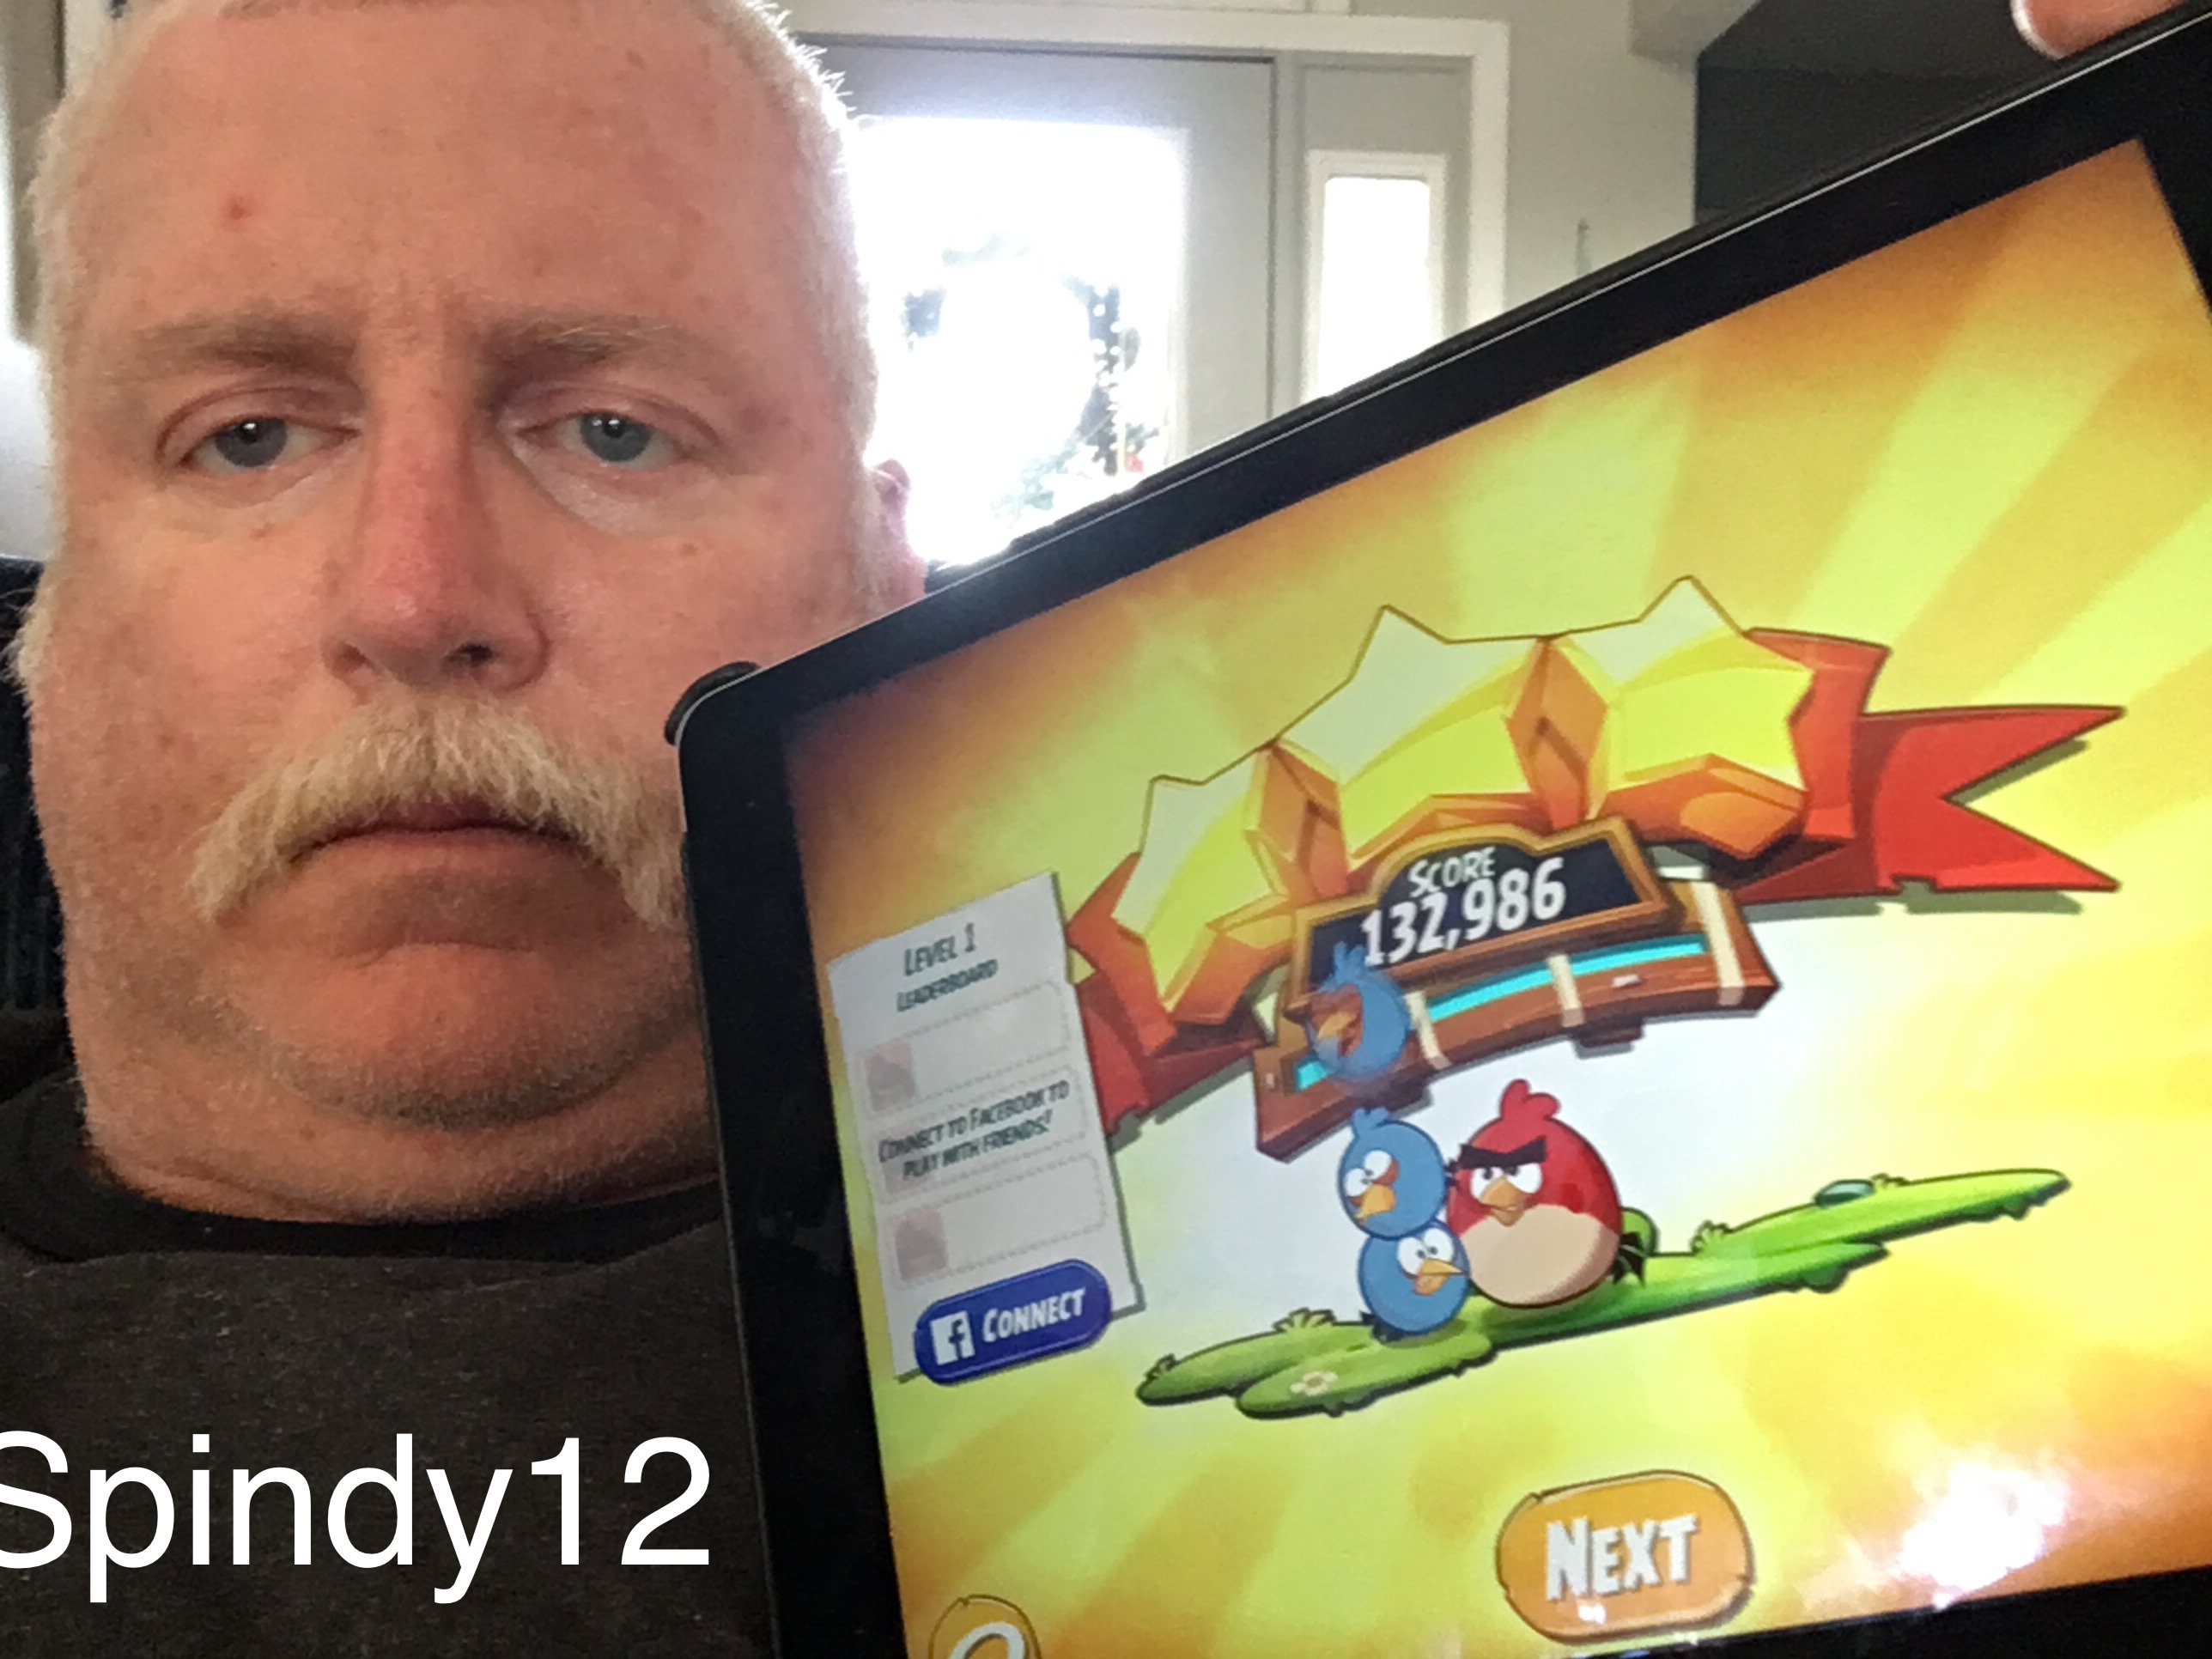 Spindy12: Angry Birds 2: Level 1 (iOS) 132,986 points on 2016-12-20 14:59:12